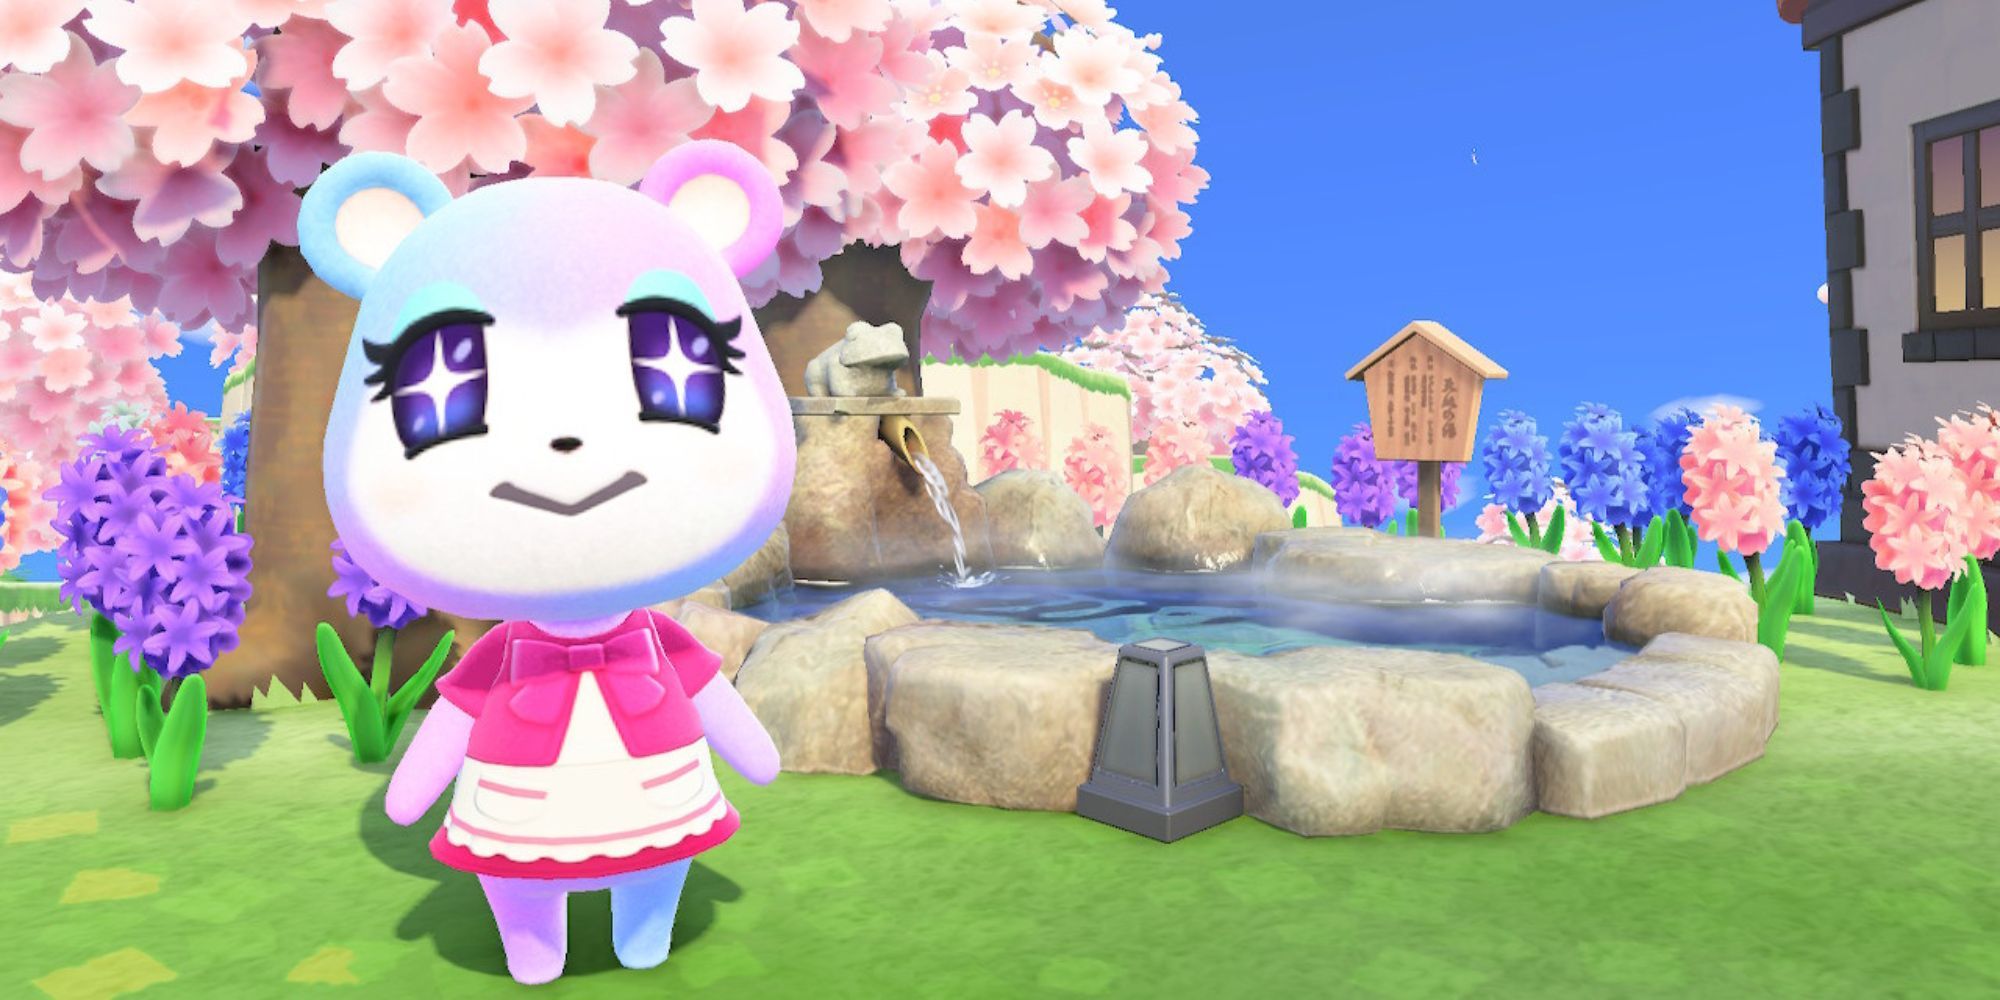 Judy stands by a pond beneath a cherry-blossom tree